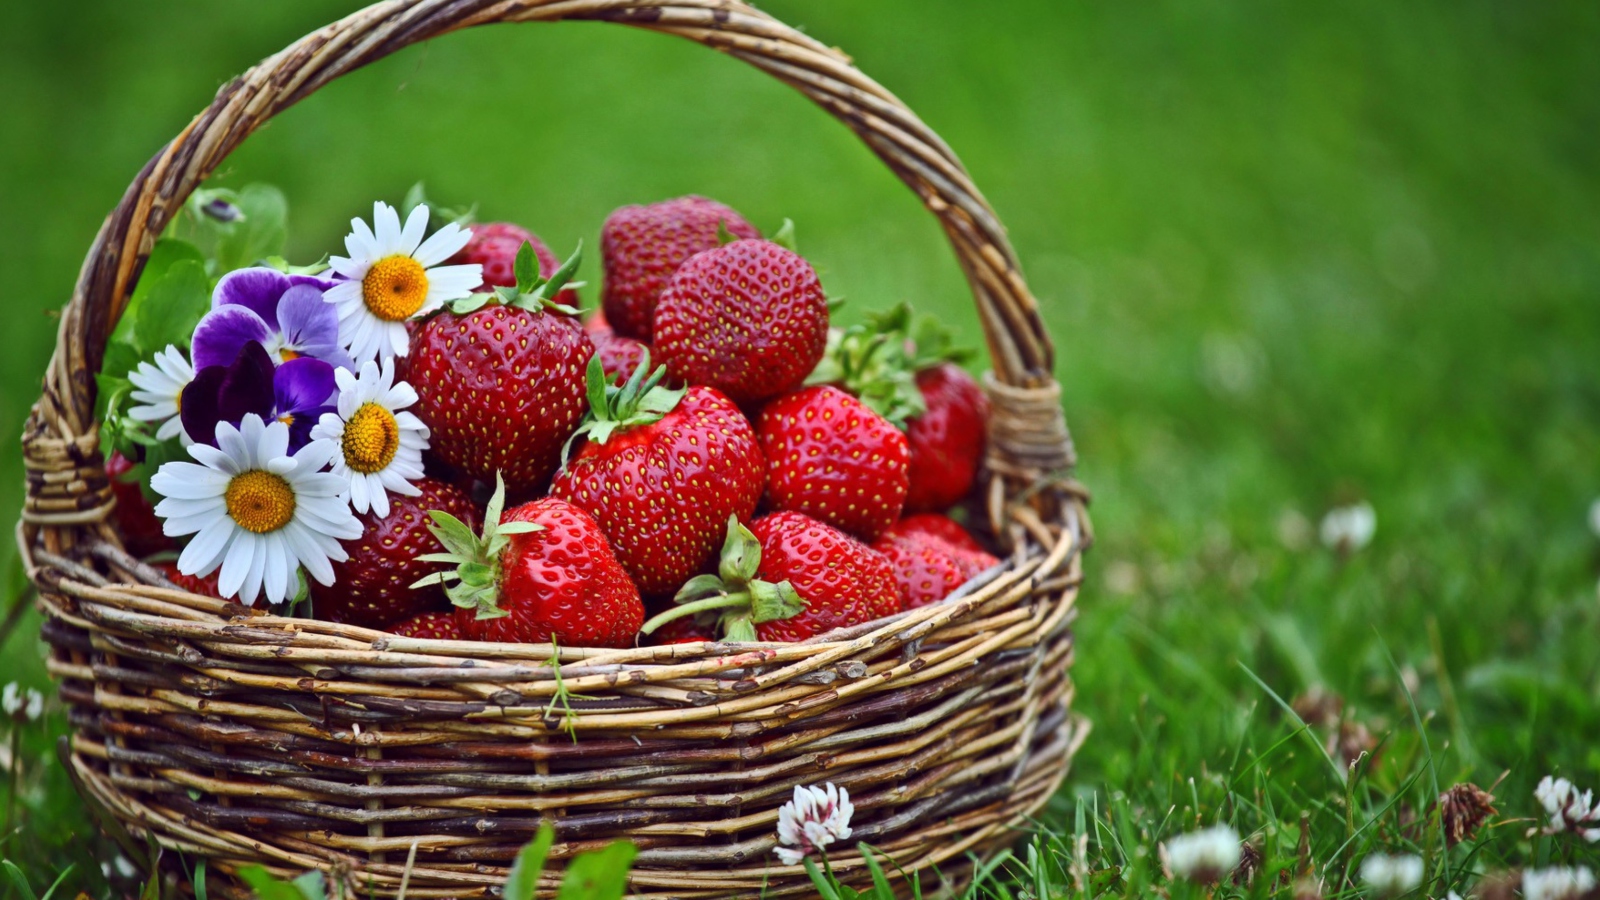 Berries And Flowers wallpaper 1600x900